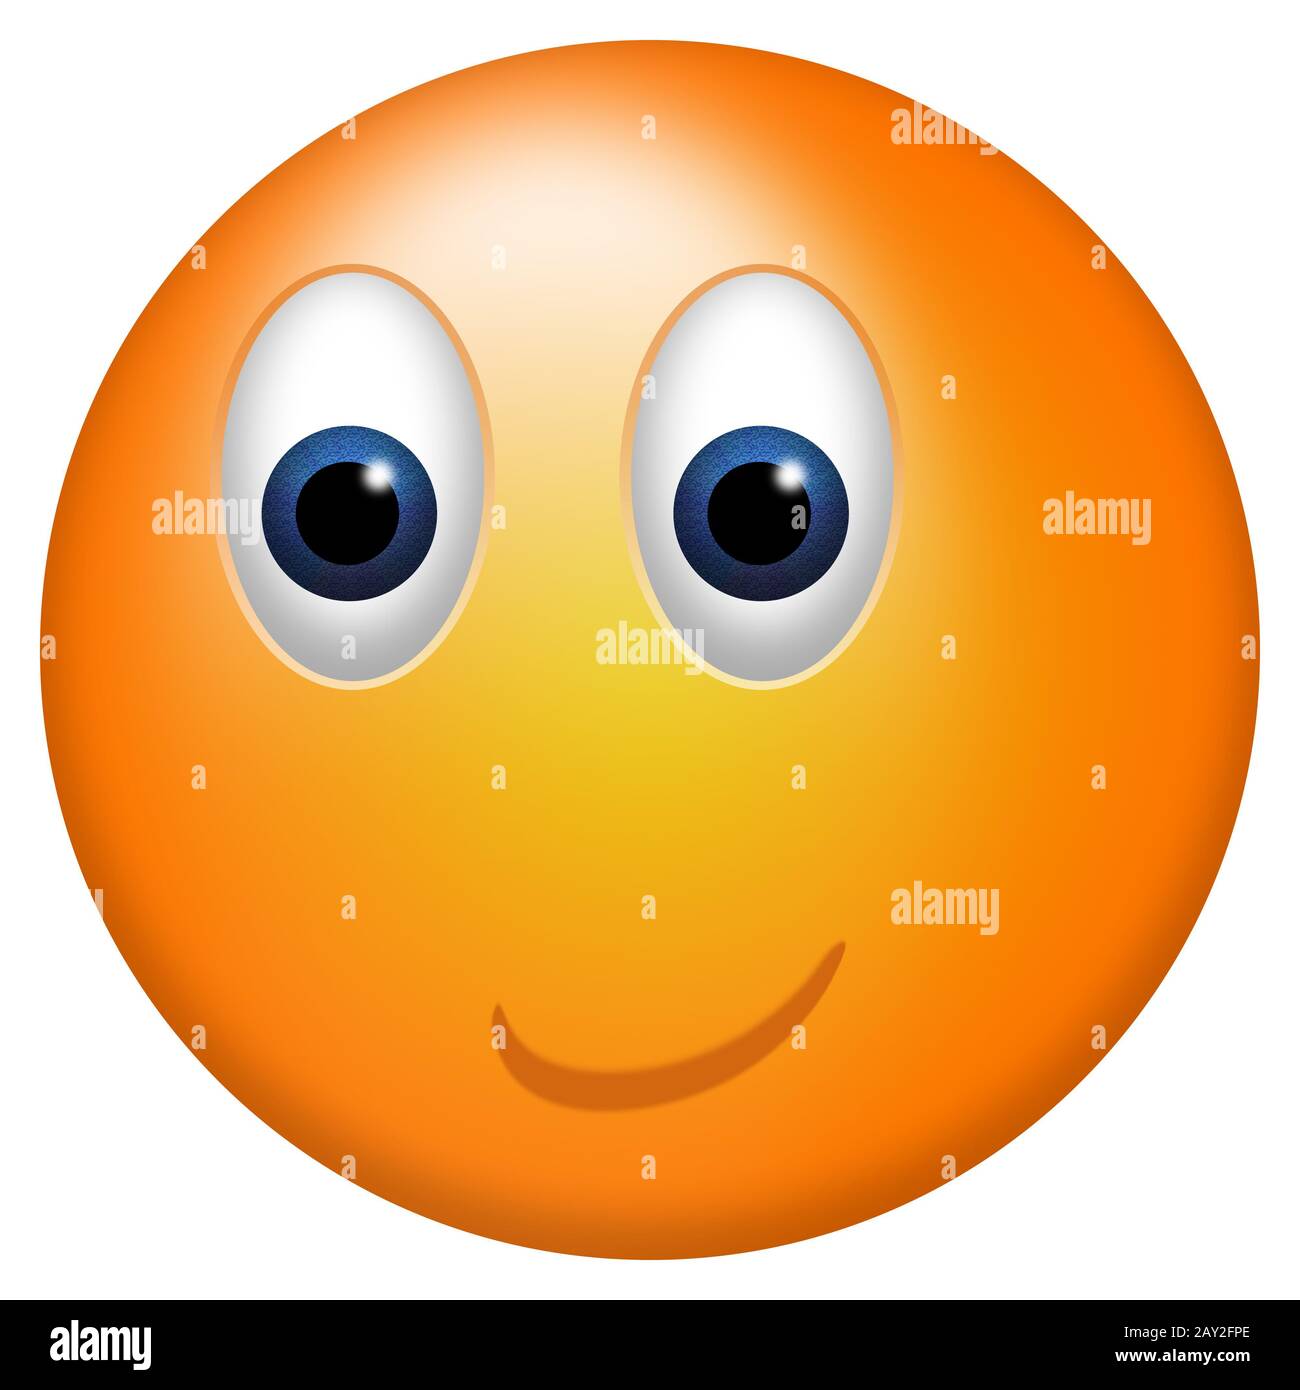 Orange round 3d smiley with big eyes and happy expression. Stock Photo